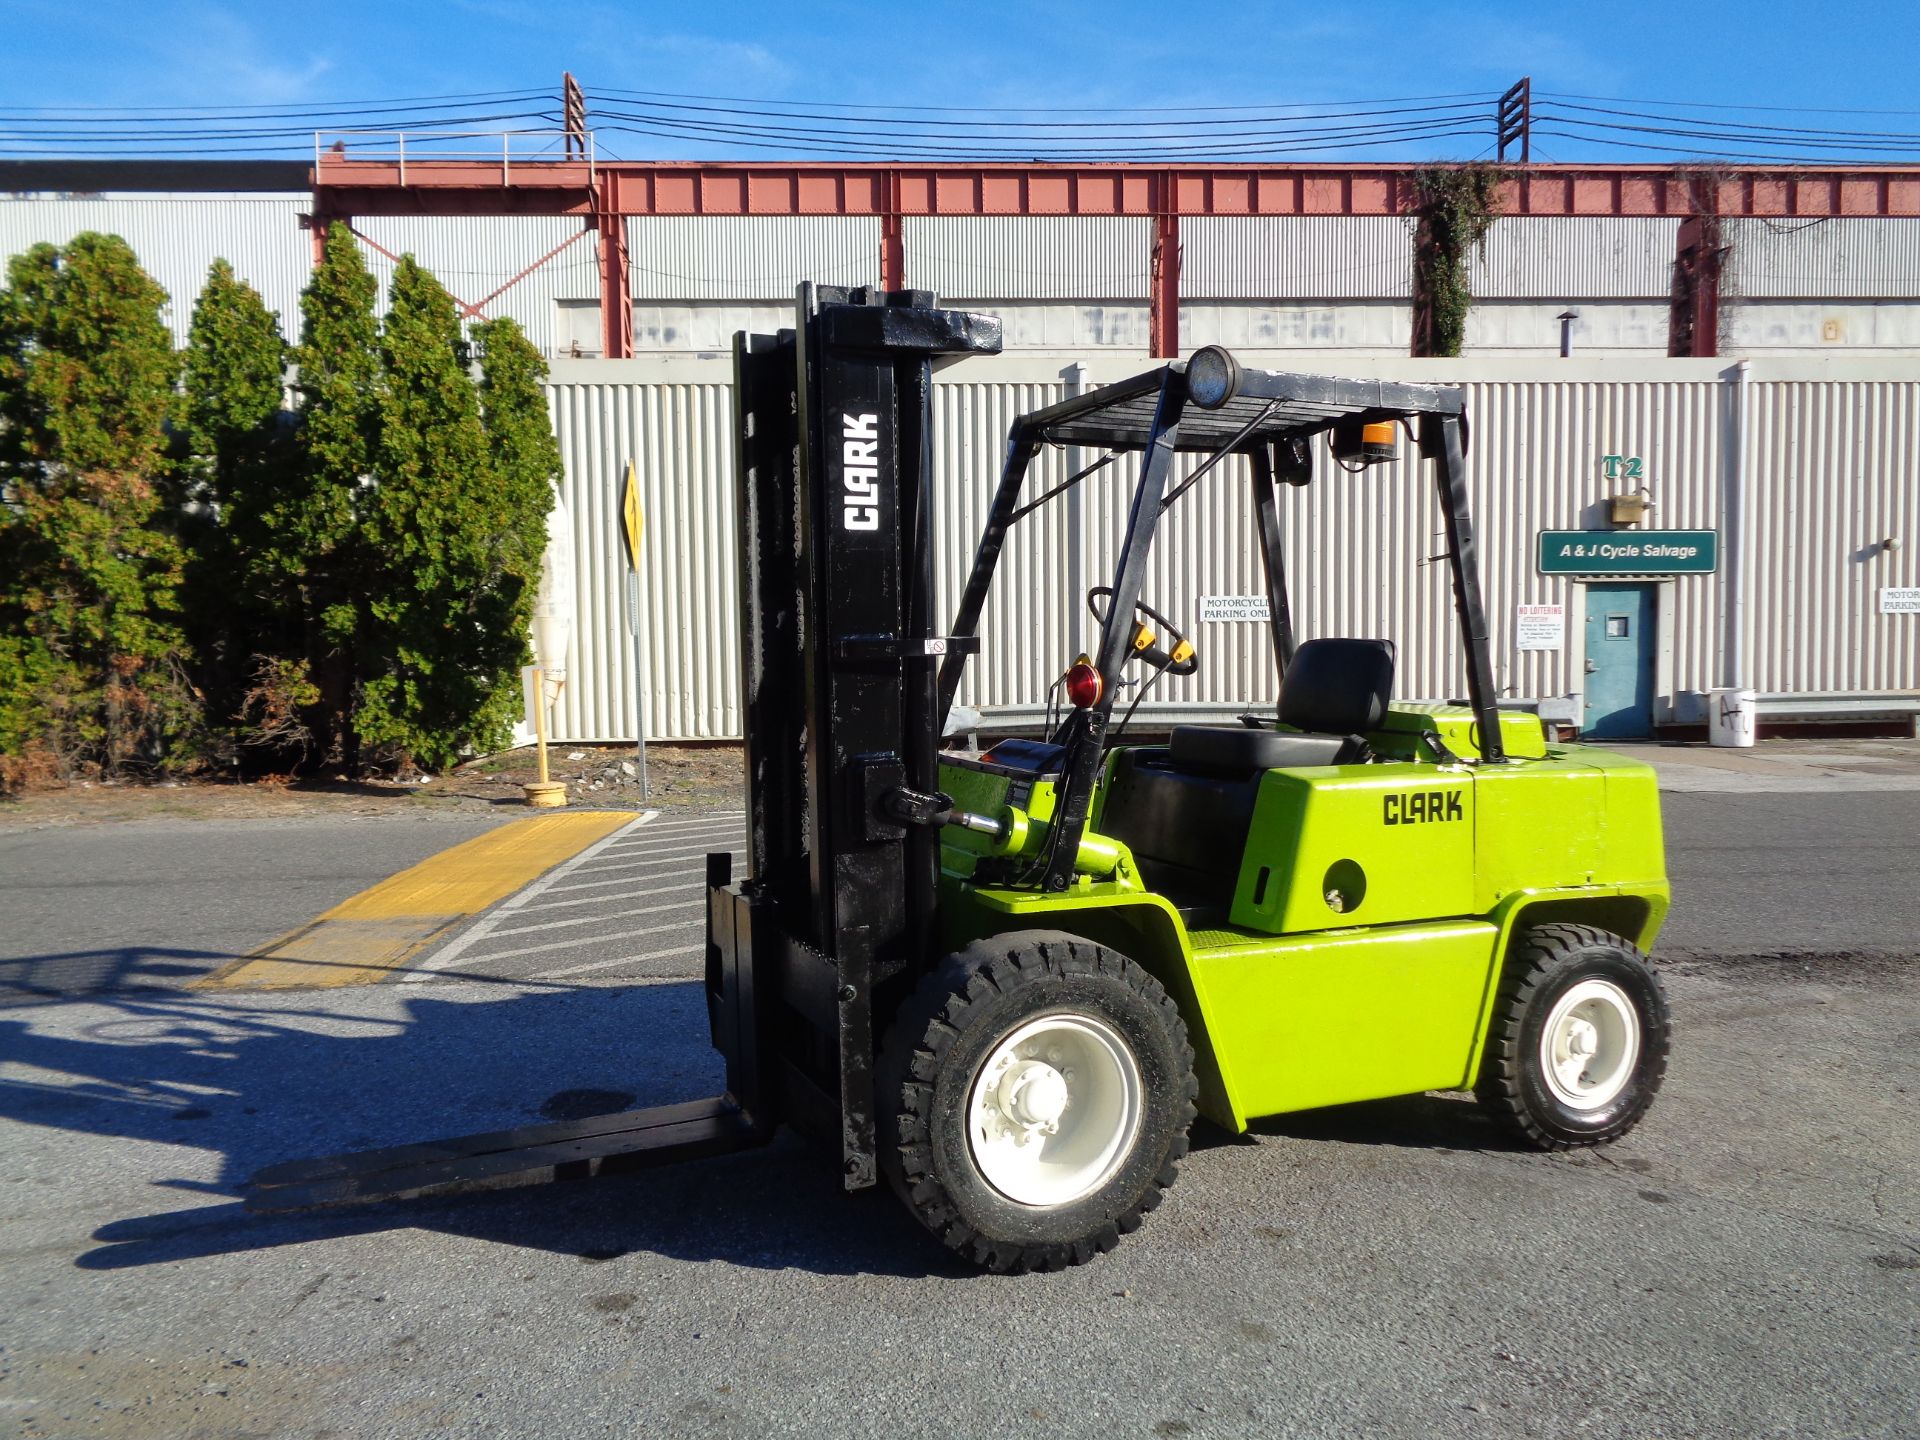 Clark C500-YS80 8,000 LBS Pneumatic Forklift - Image 4 of 11